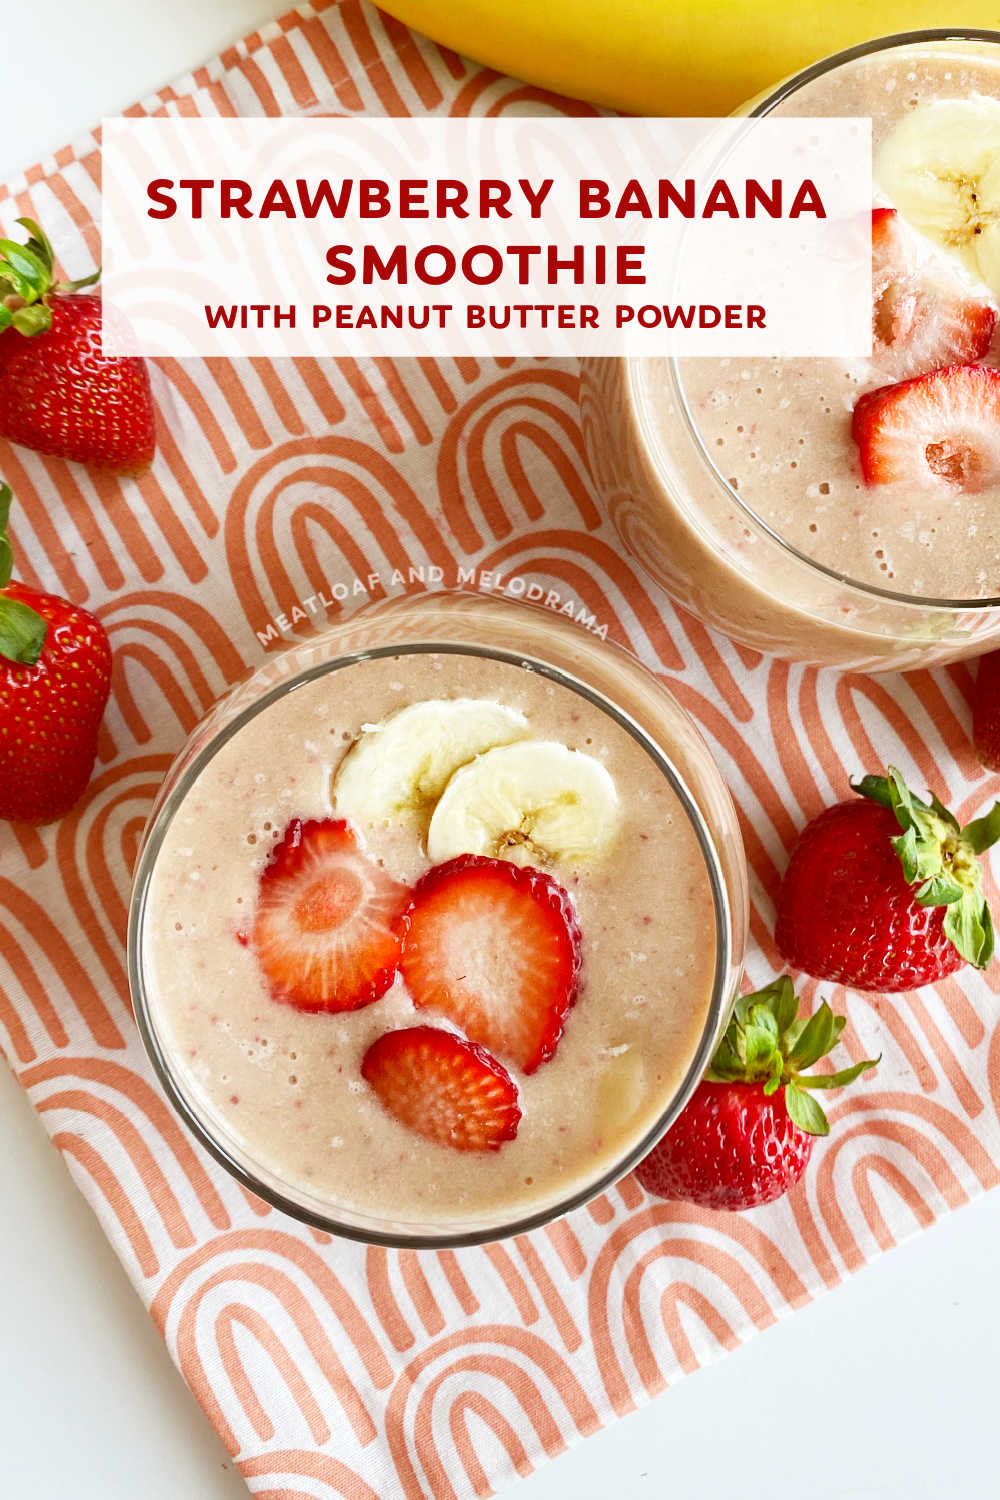 This Strawberry Banana Protein Smoothie recipe made with peanut powder and without yogurt is a delicious protein packed plant based breakfast or afternoon snack. Use oat milk or almond milk to keep this fruit smoothie dairy free!  via @meamel